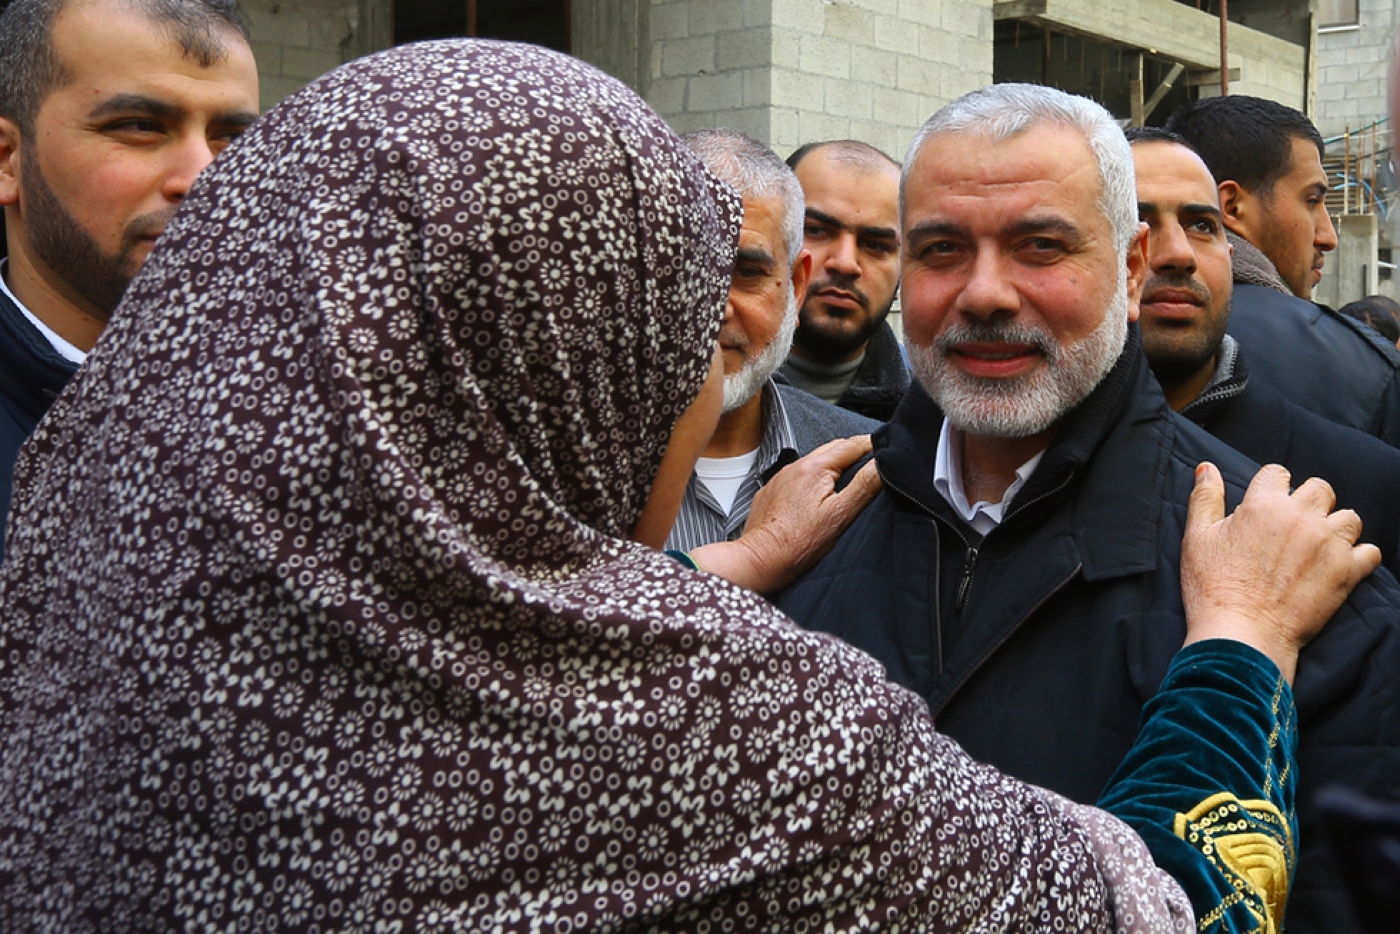 Ismail Haniyeh elected new political leader of Hamas | Middle East Eye